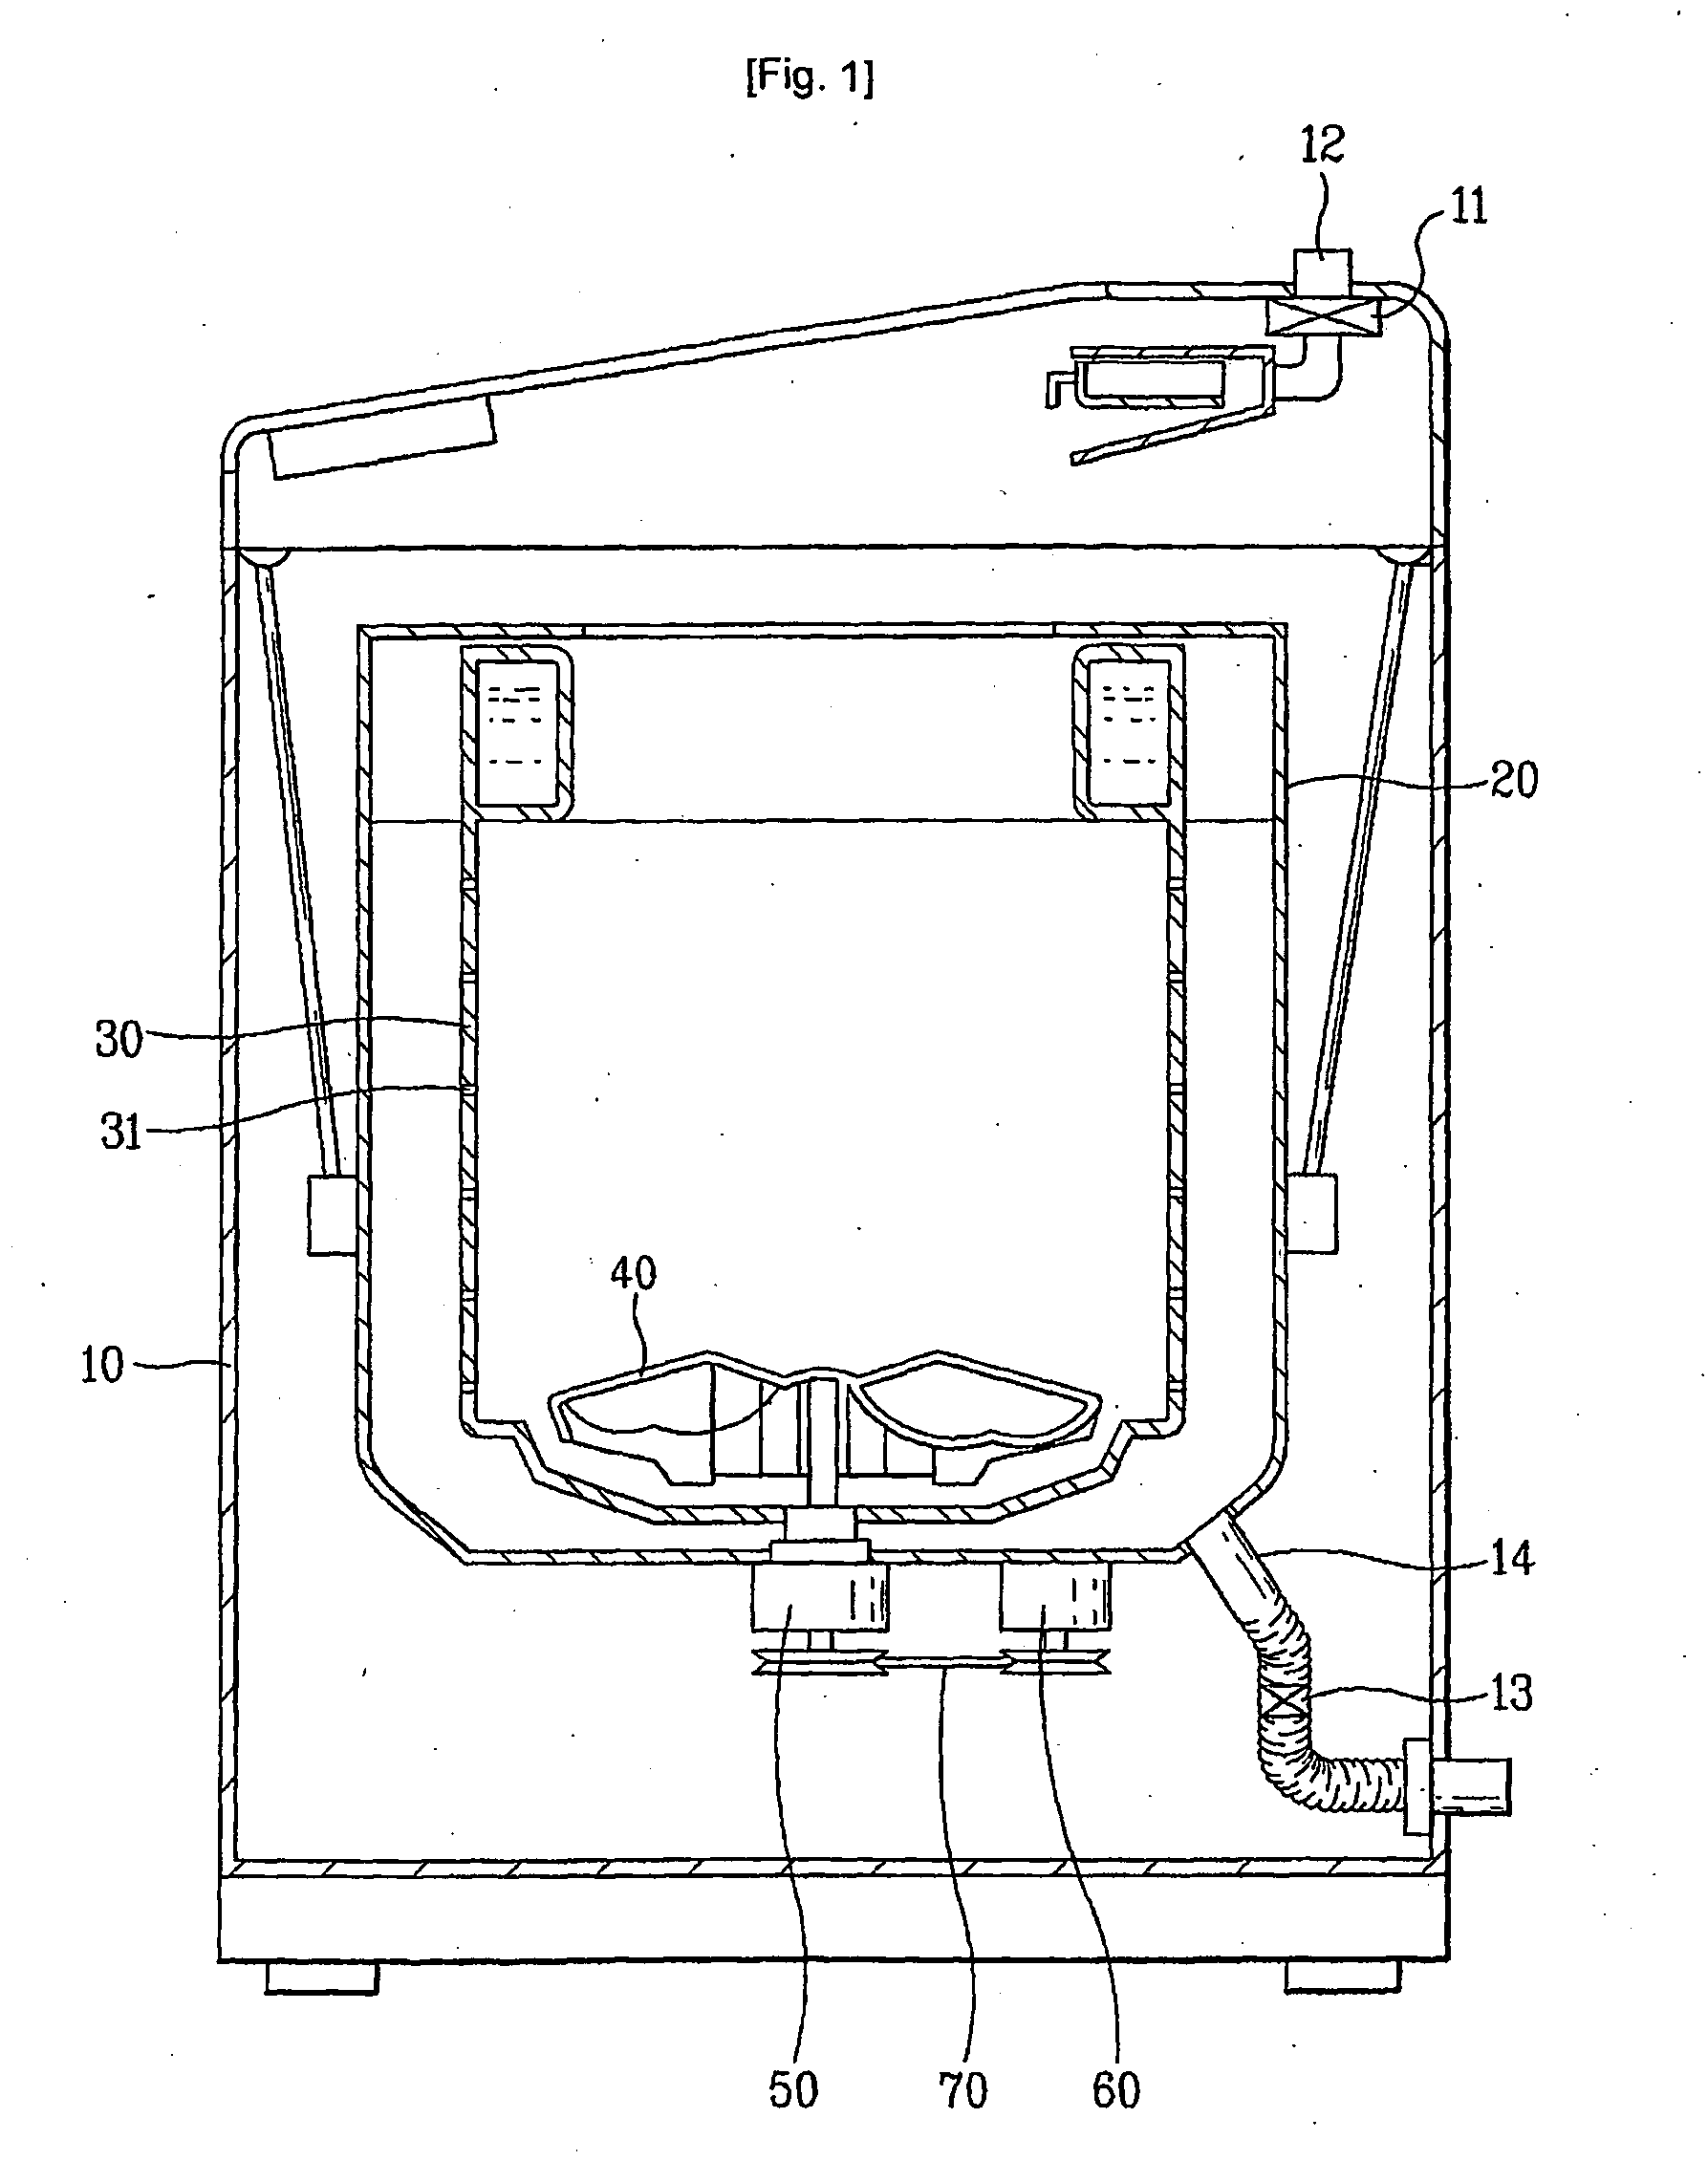 Method for cleaning a tub in a washing machine and a washing machine performing the same